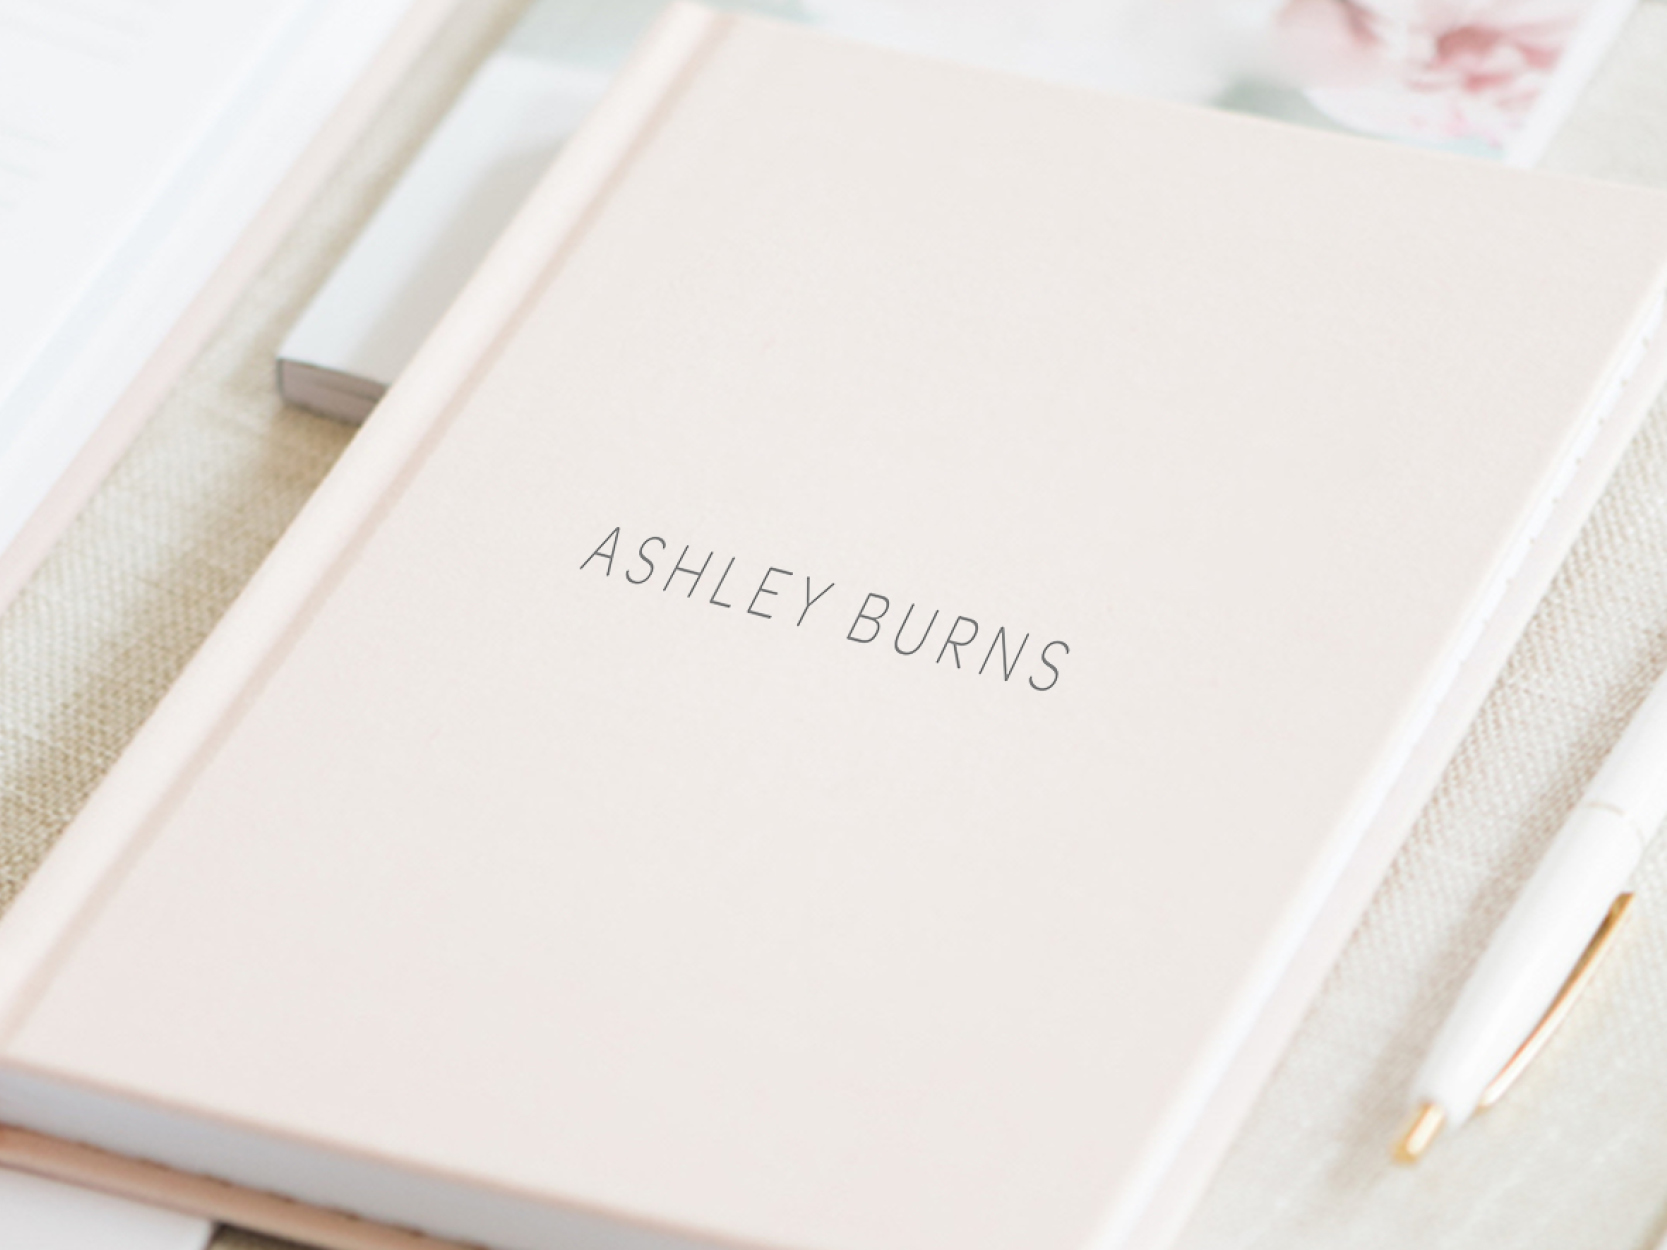 Ashley Burns is a wedding photographer in the LA area with modern and simple branding by Emma Rose Company.  Get inspired with her custom Squarespace website design by Emma Rose.  Custom web design for photographers.6.jpg